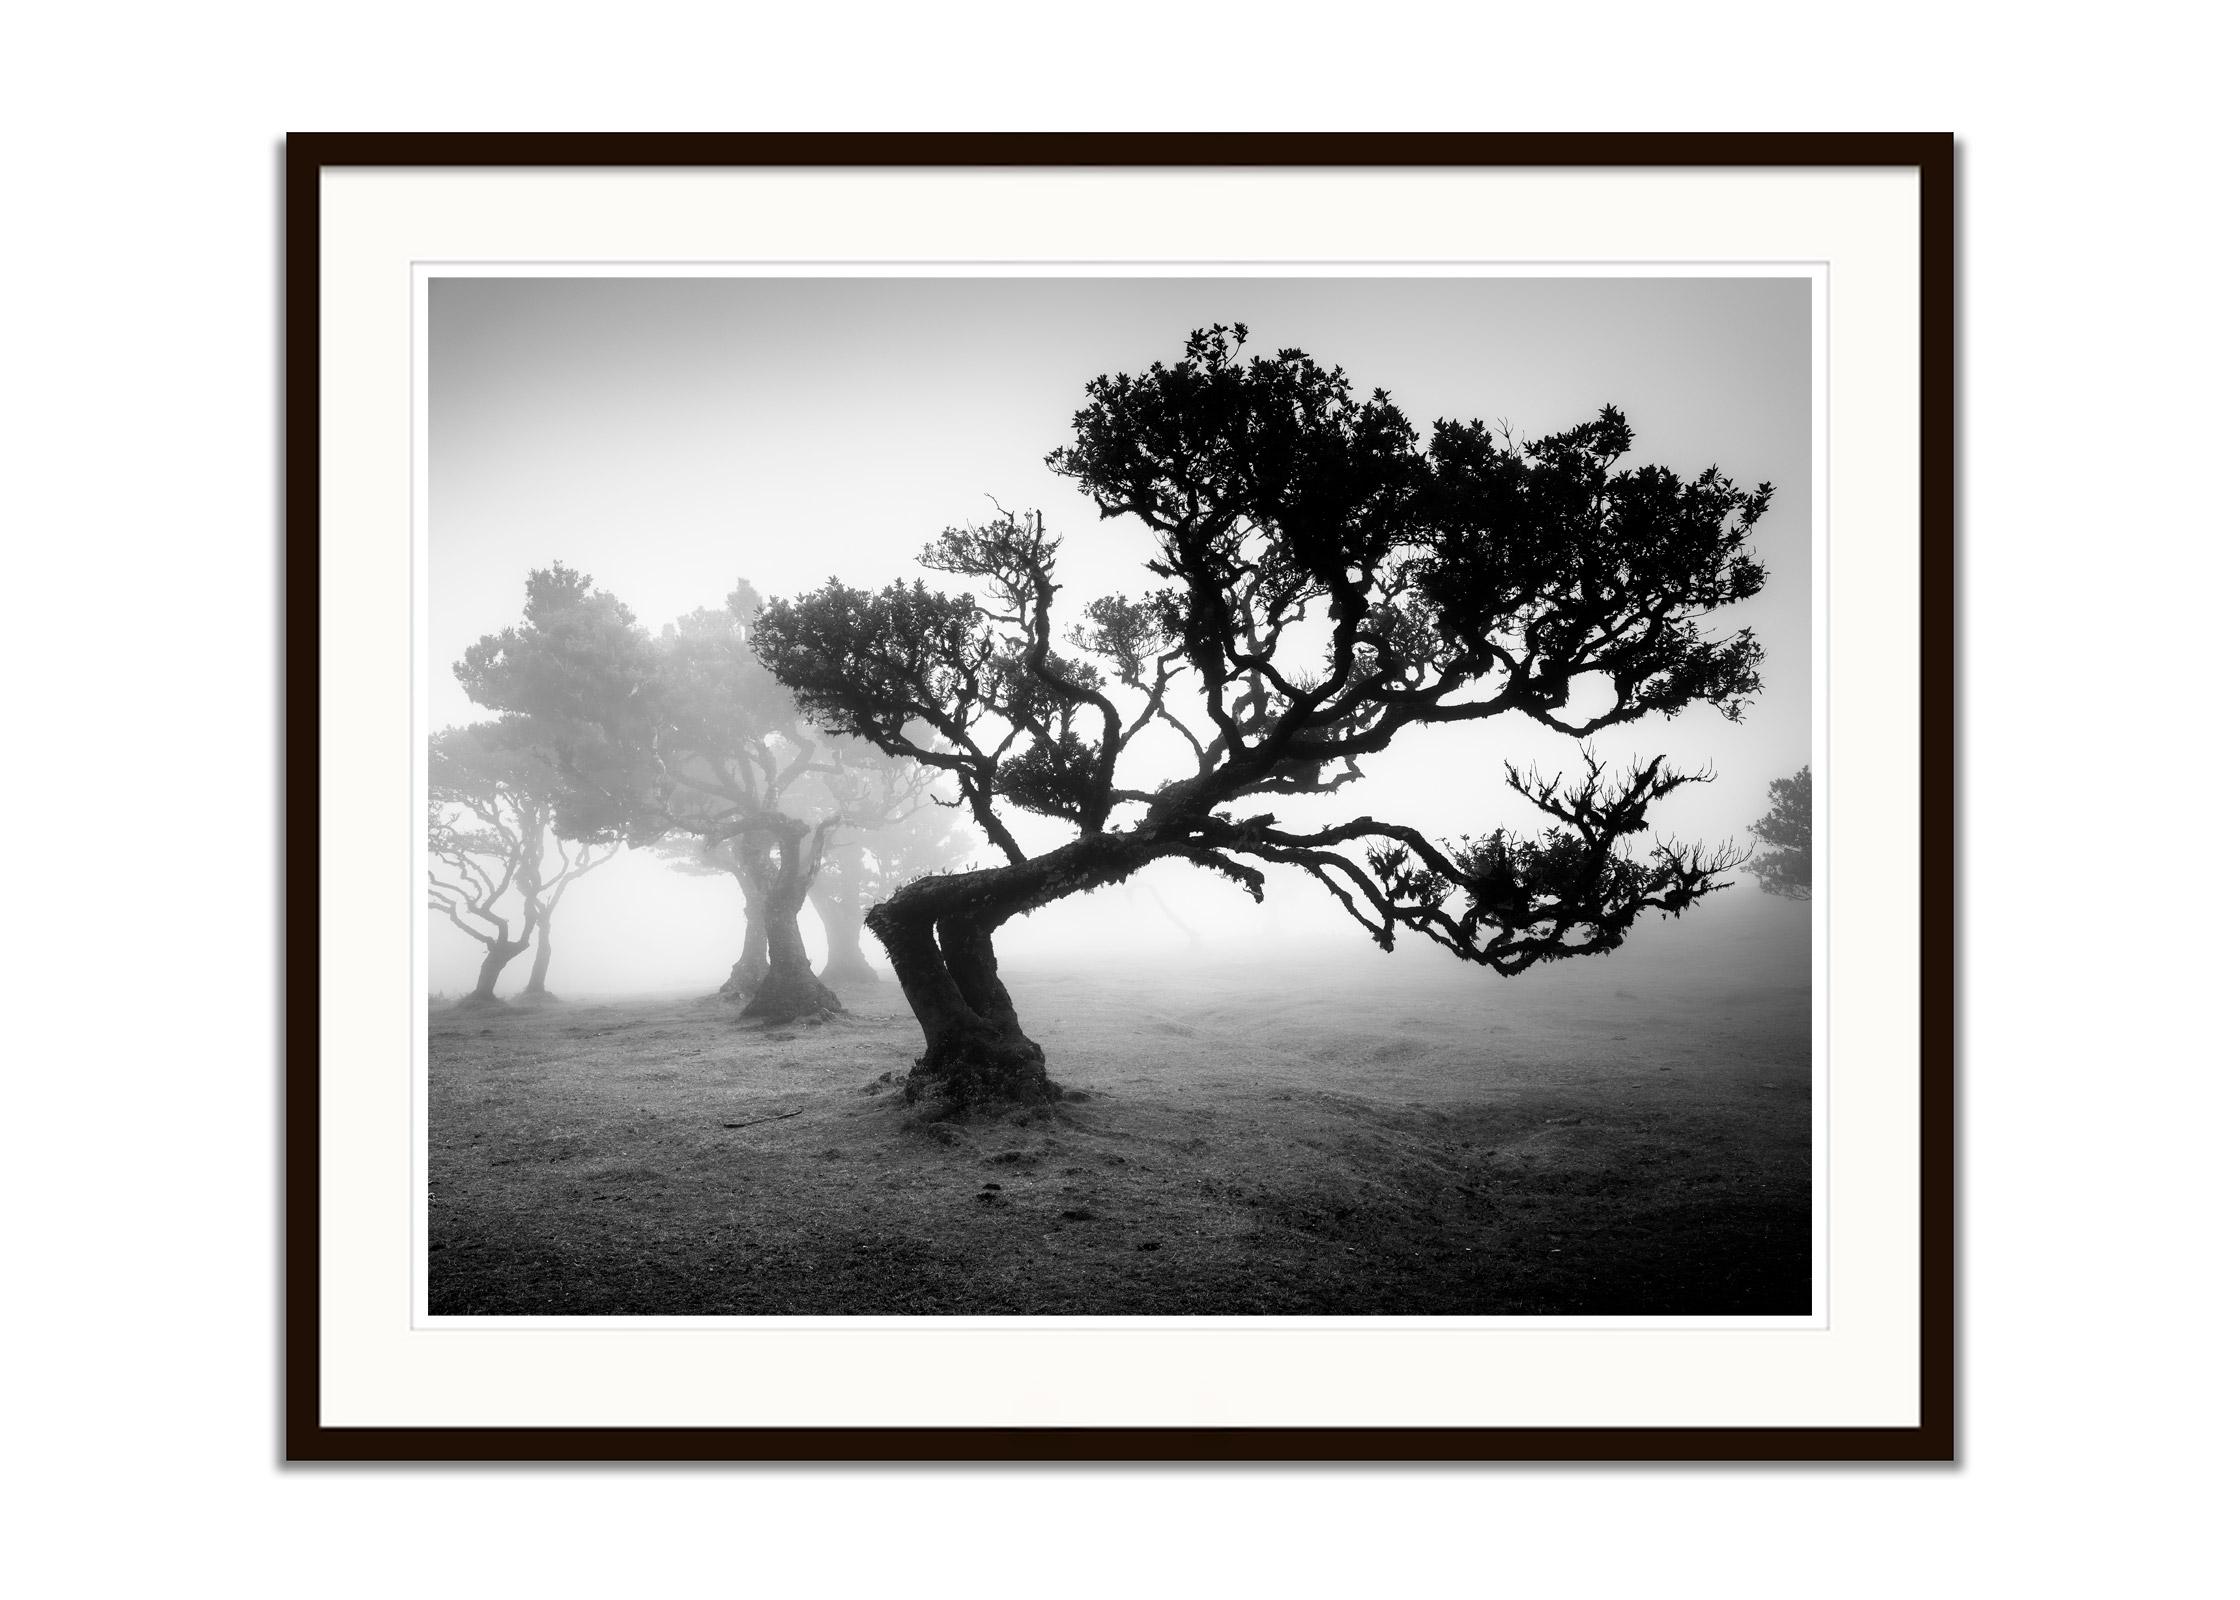 Black and white fine art landscape photography print. Bent tree in fog in the fairy forest on the island of Madeira, Portugal. Archival pigment ink print, edition of 7. Signed, titled, dated and numbered by artist. Certificate of authenticity